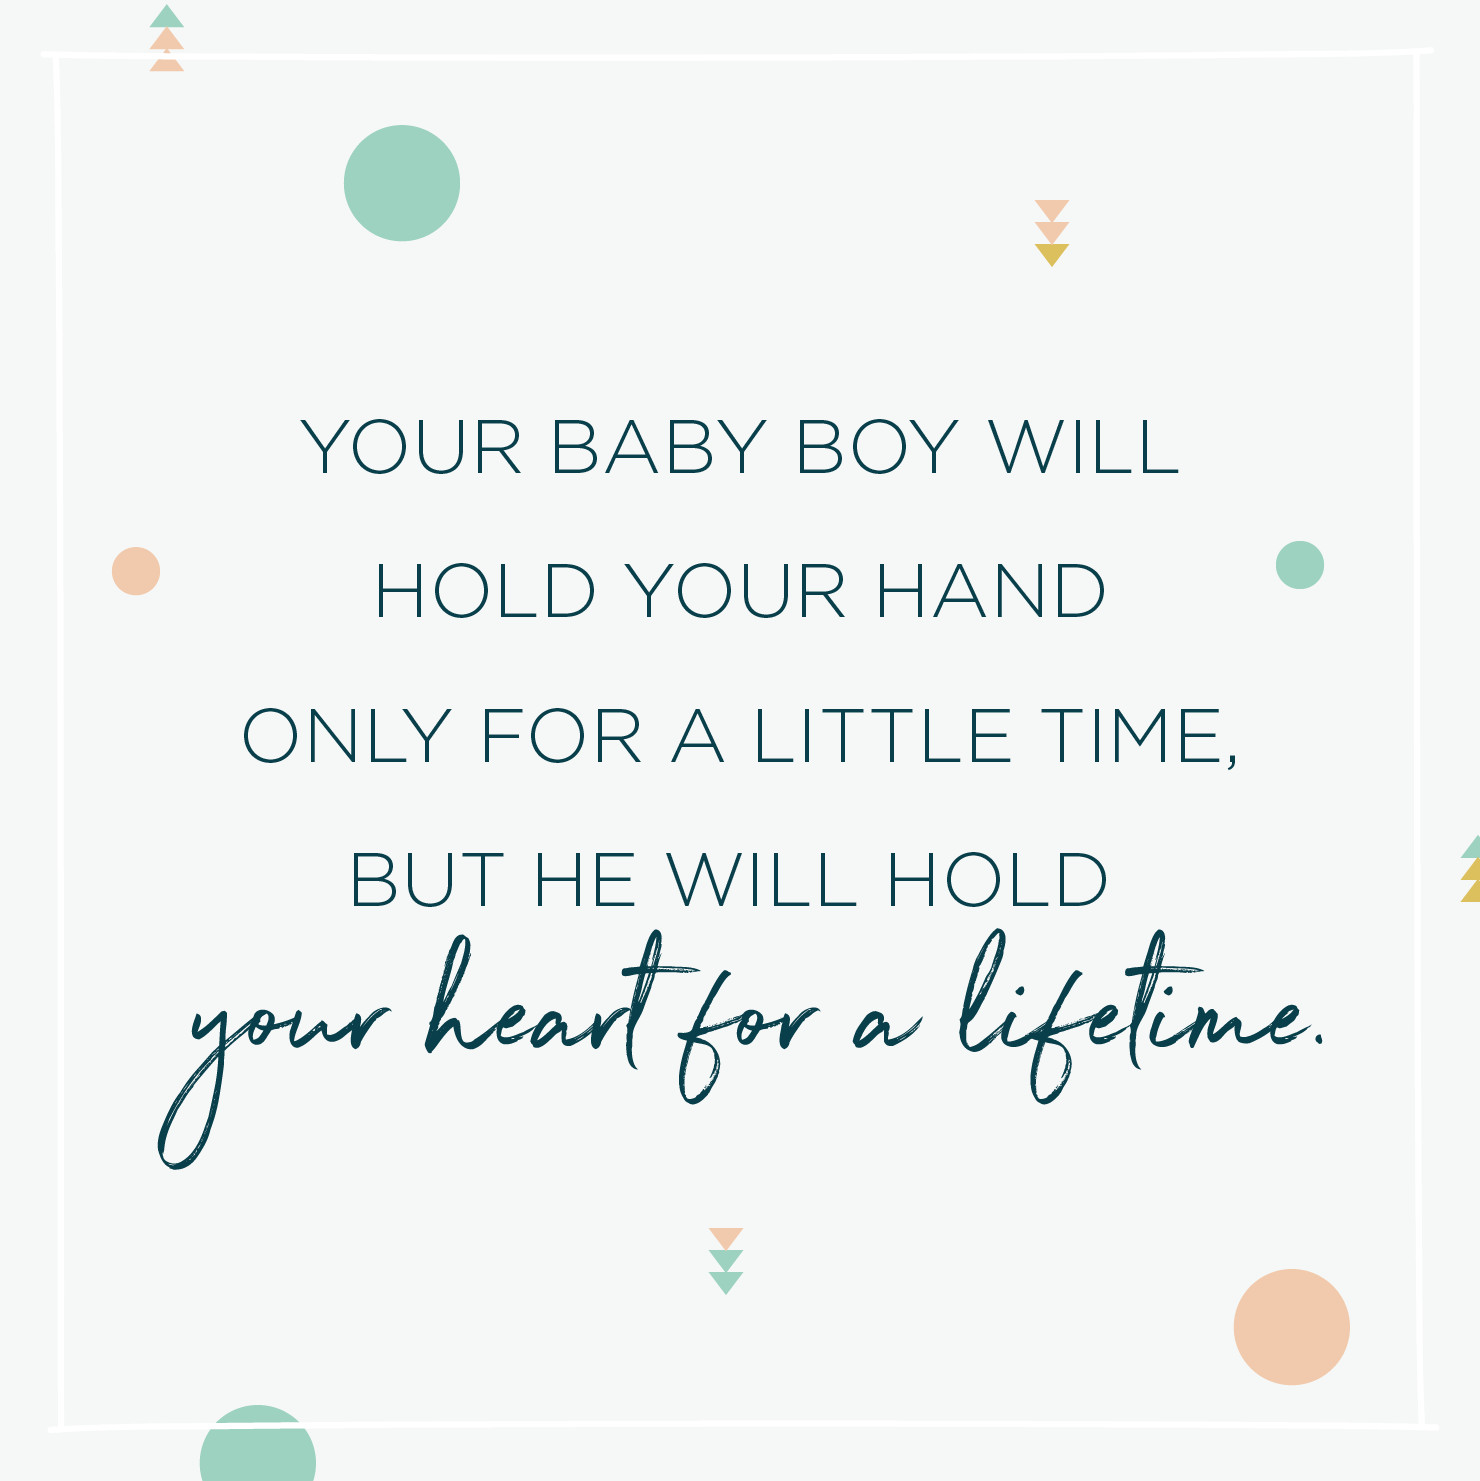 Quotes About Having A Baby Boy
 84 Inspirational Baby Quotes and Sayings